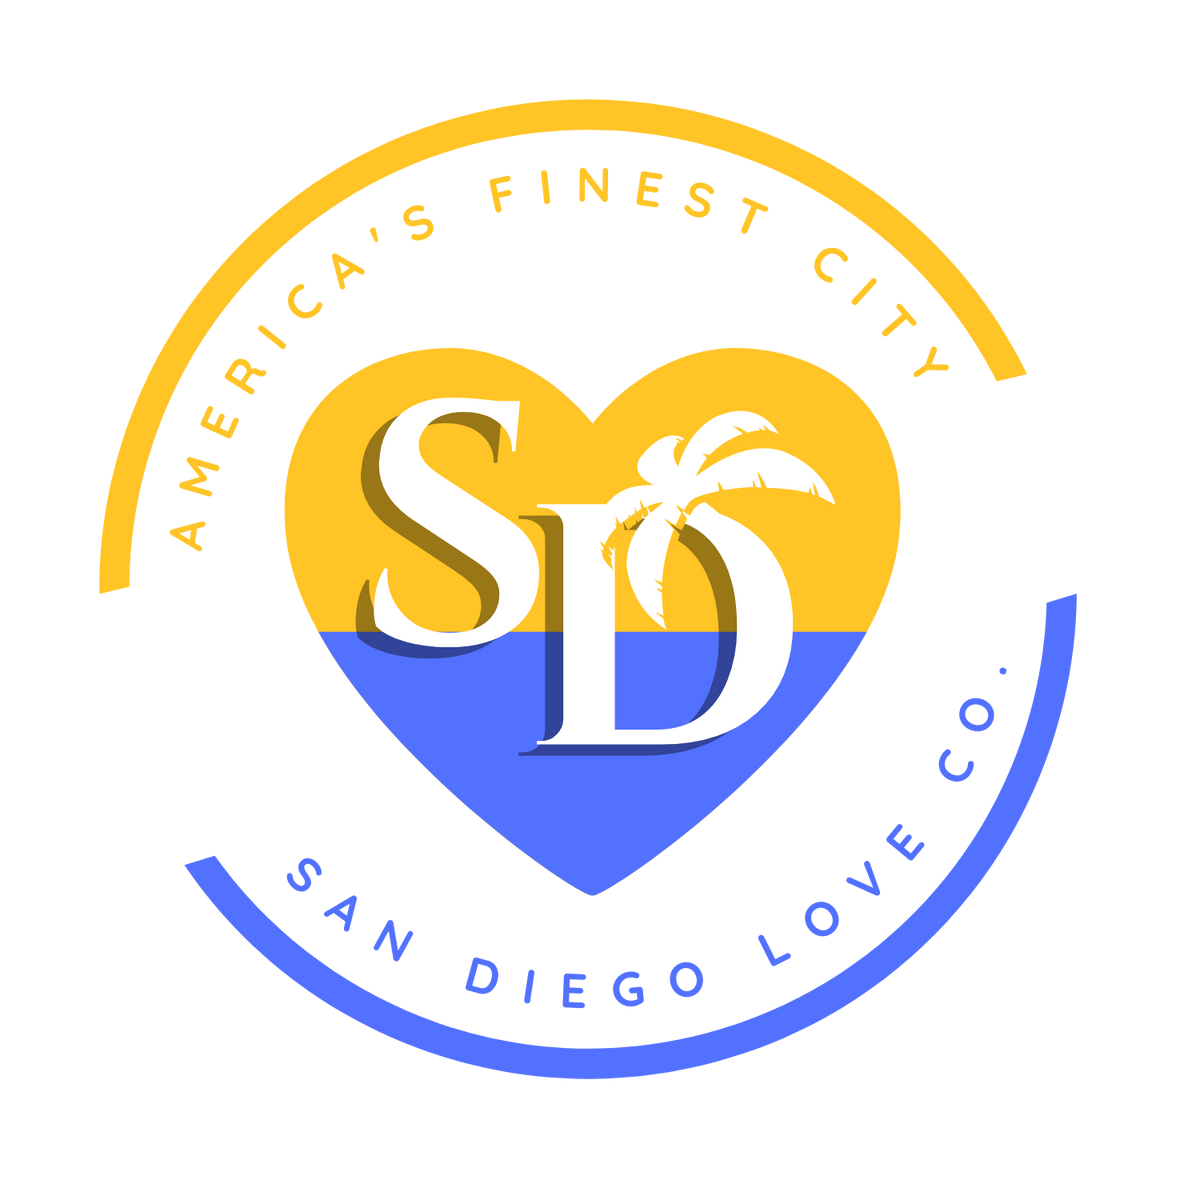 San Diego Love Co - America's Finest City - Yellow Gold and Blue SD